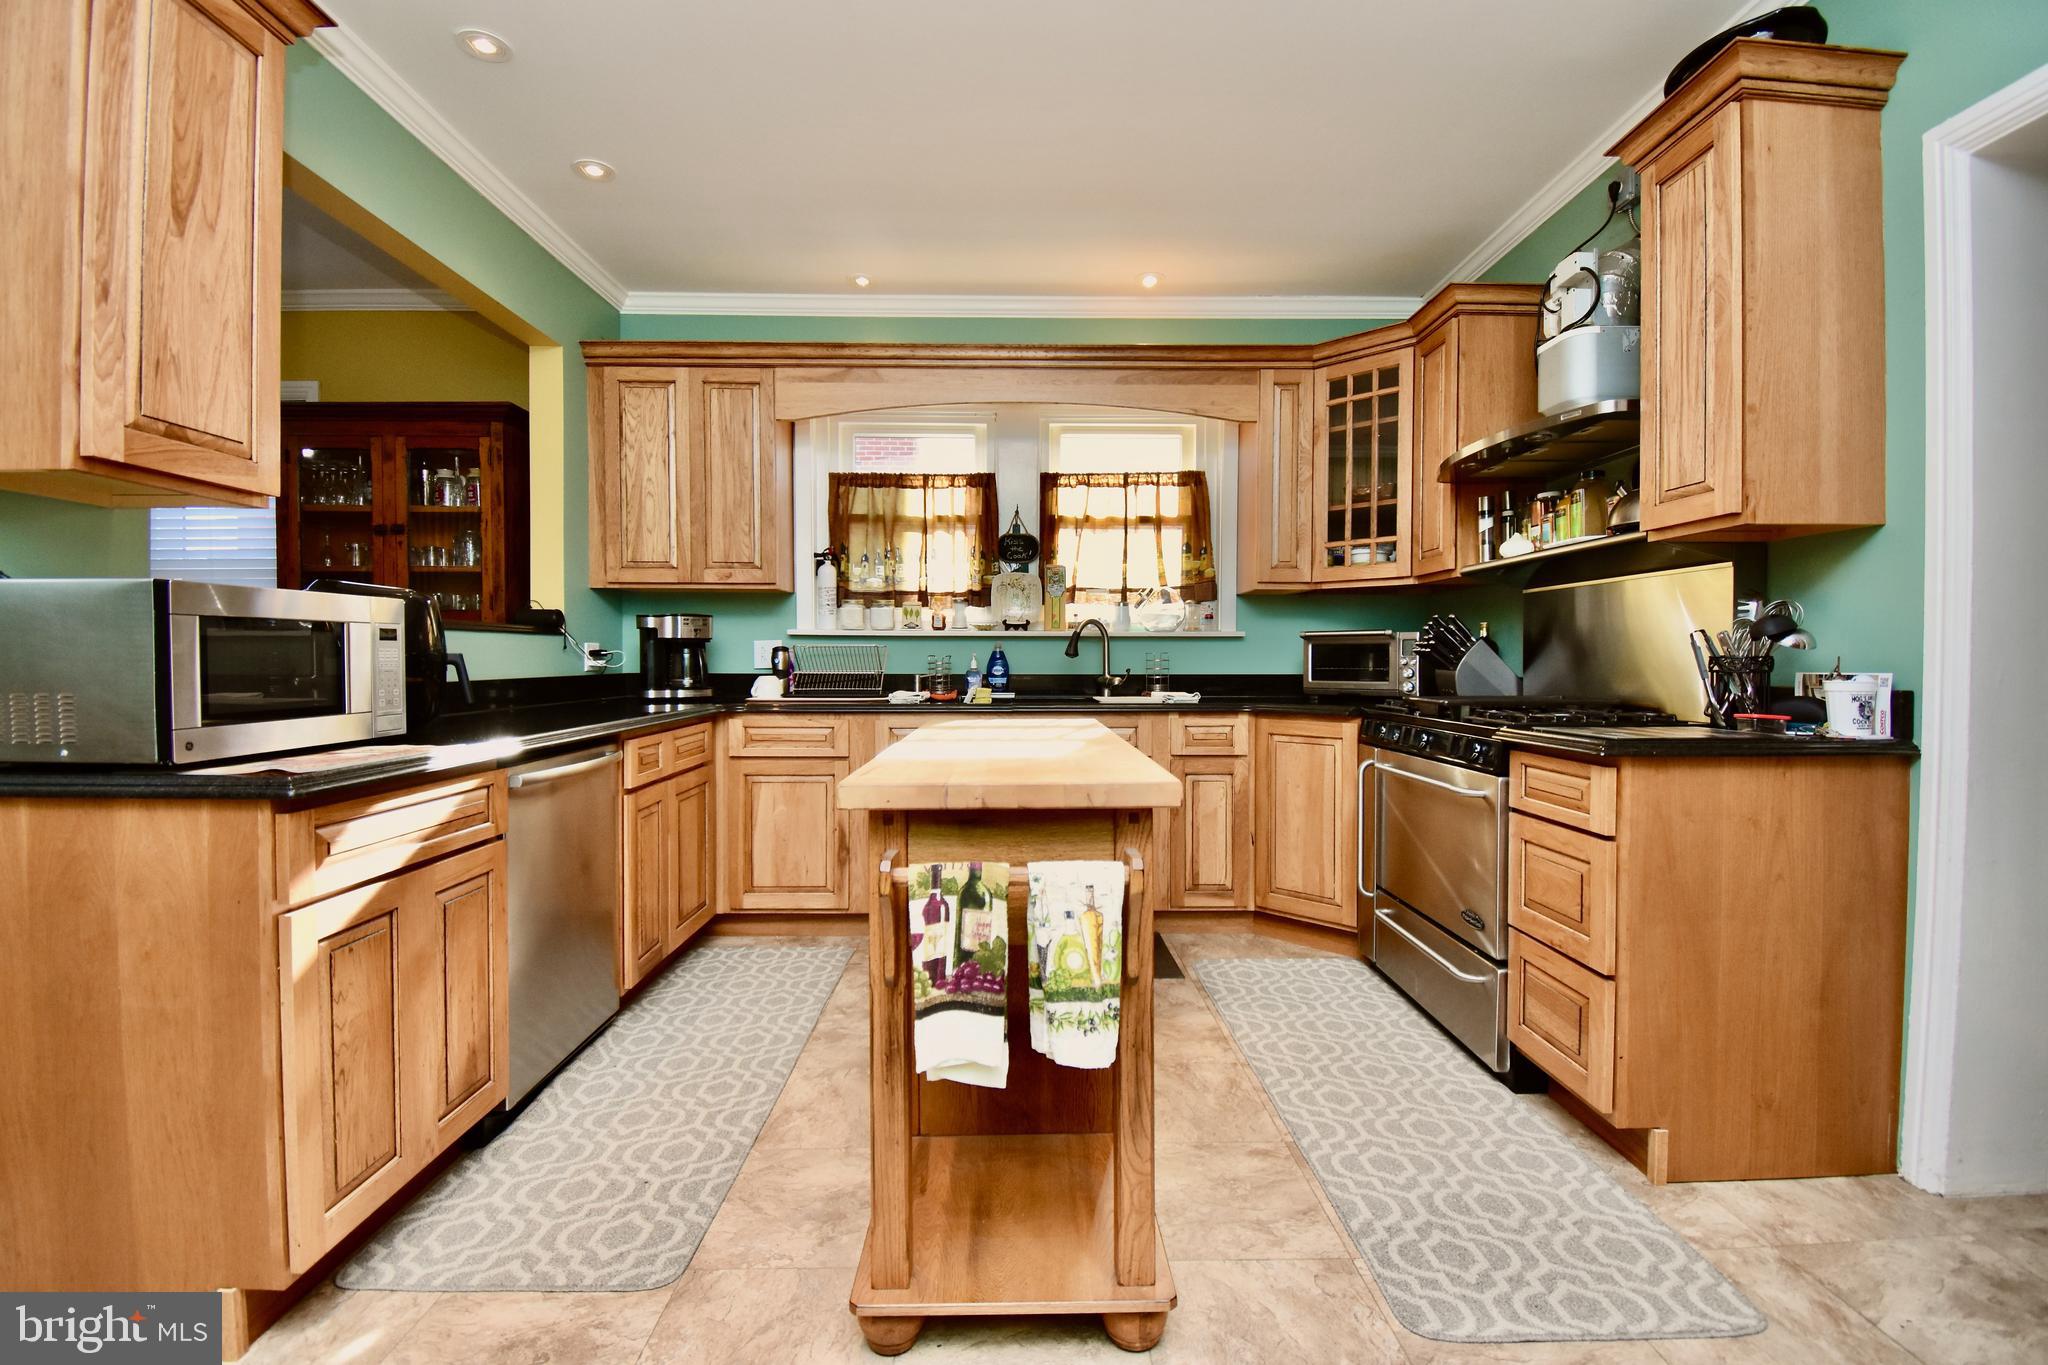 a kitchen with stainless steel appliances granite countertop a stove top oven a sink a counter space and cabinets